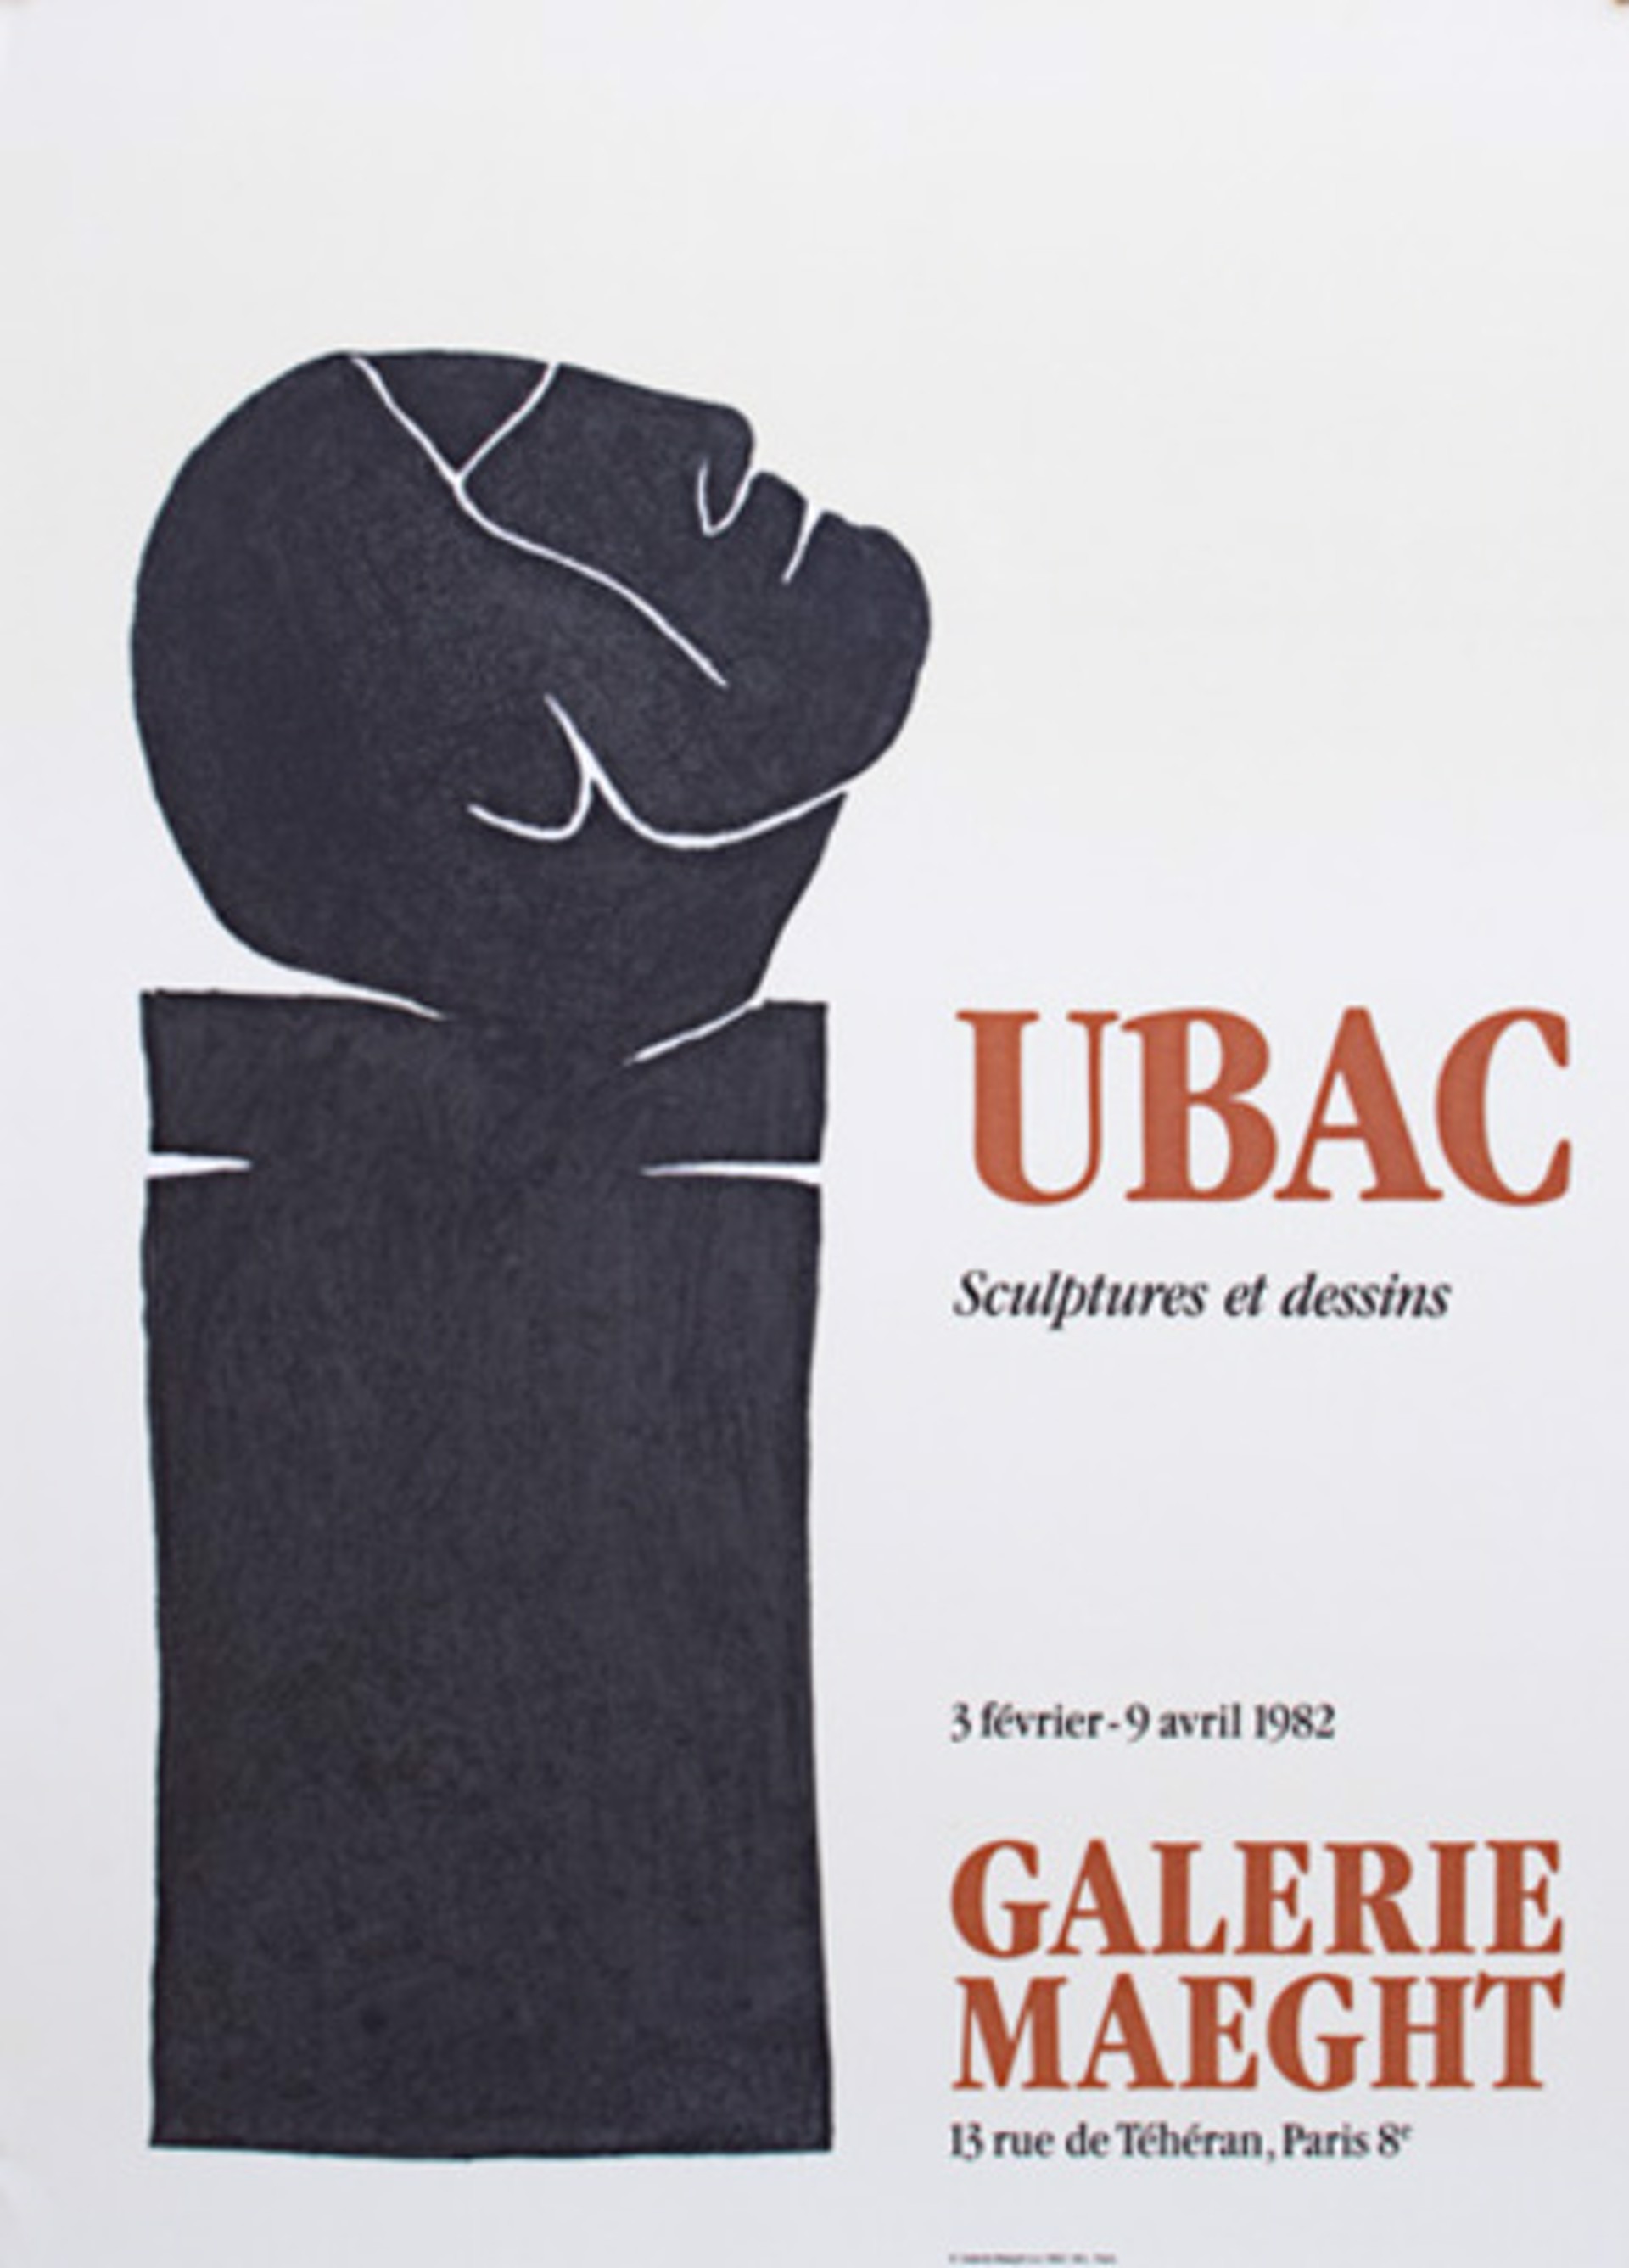 Galerie Maeght by Raoul Ubac